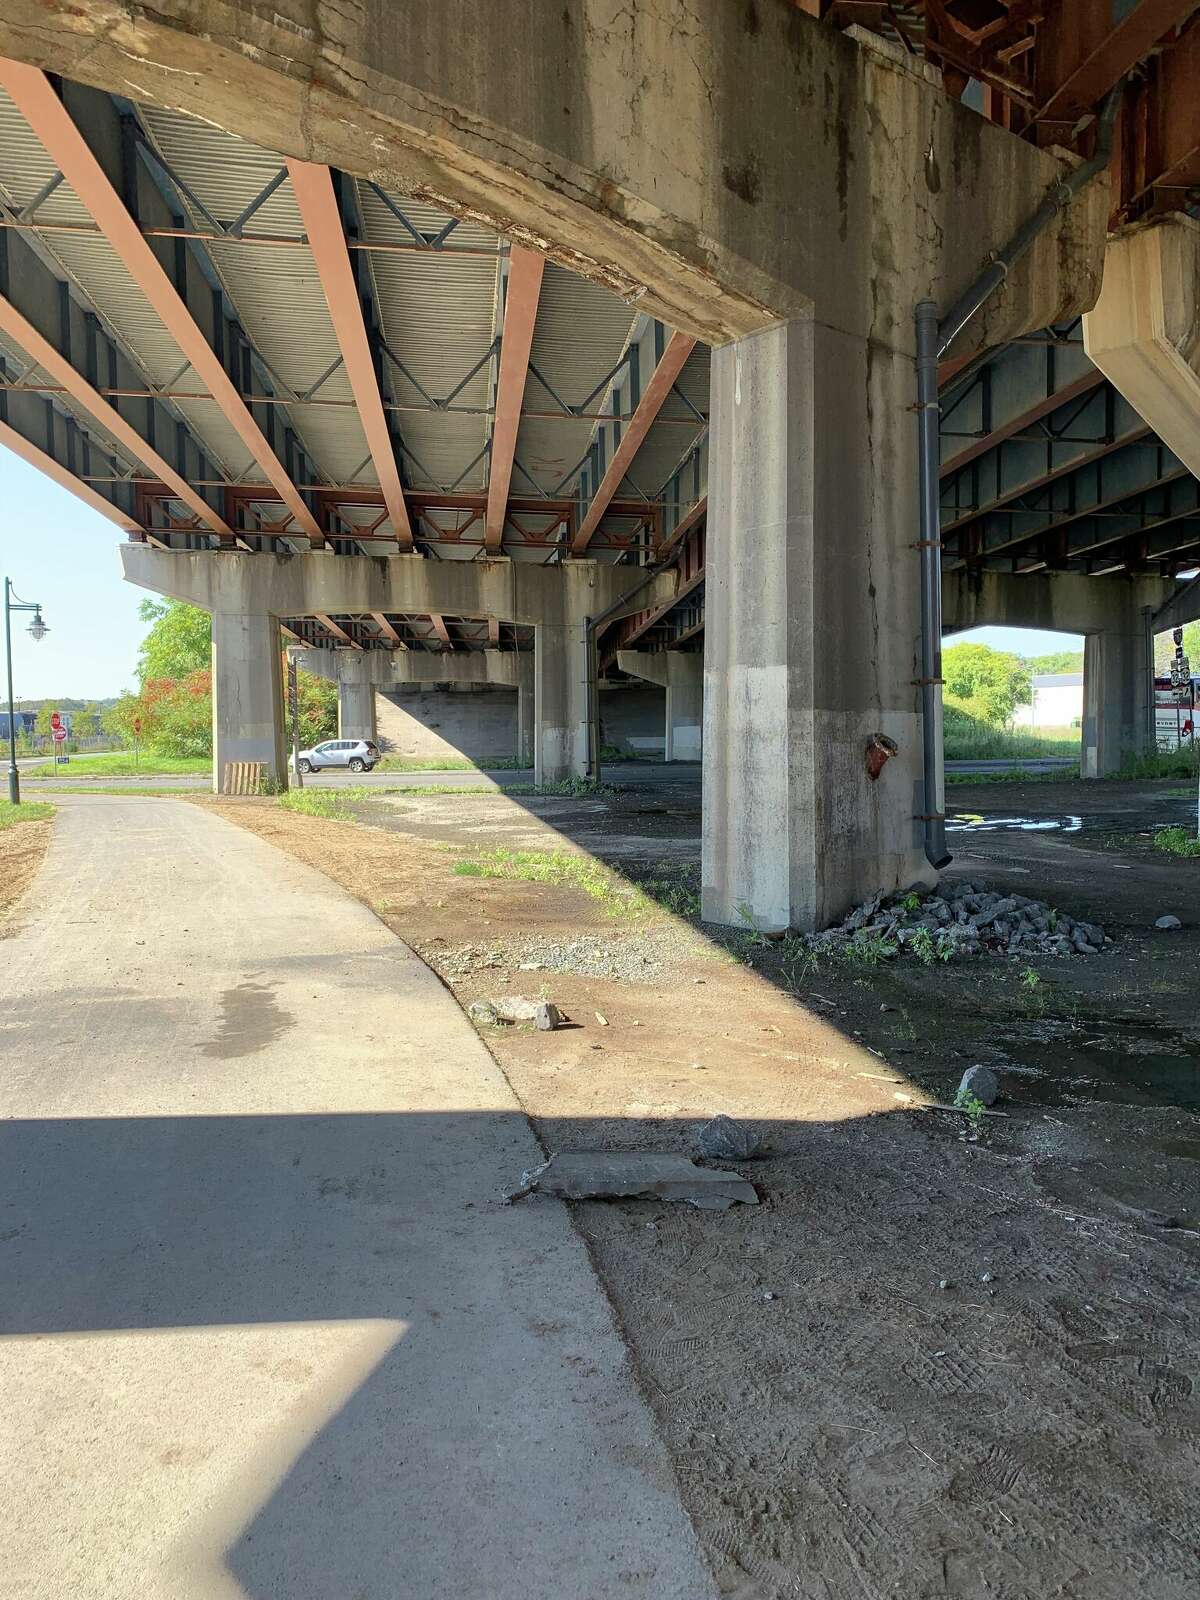 The bike trail underneath 787 by the Albany port provided by a Getting There reader.